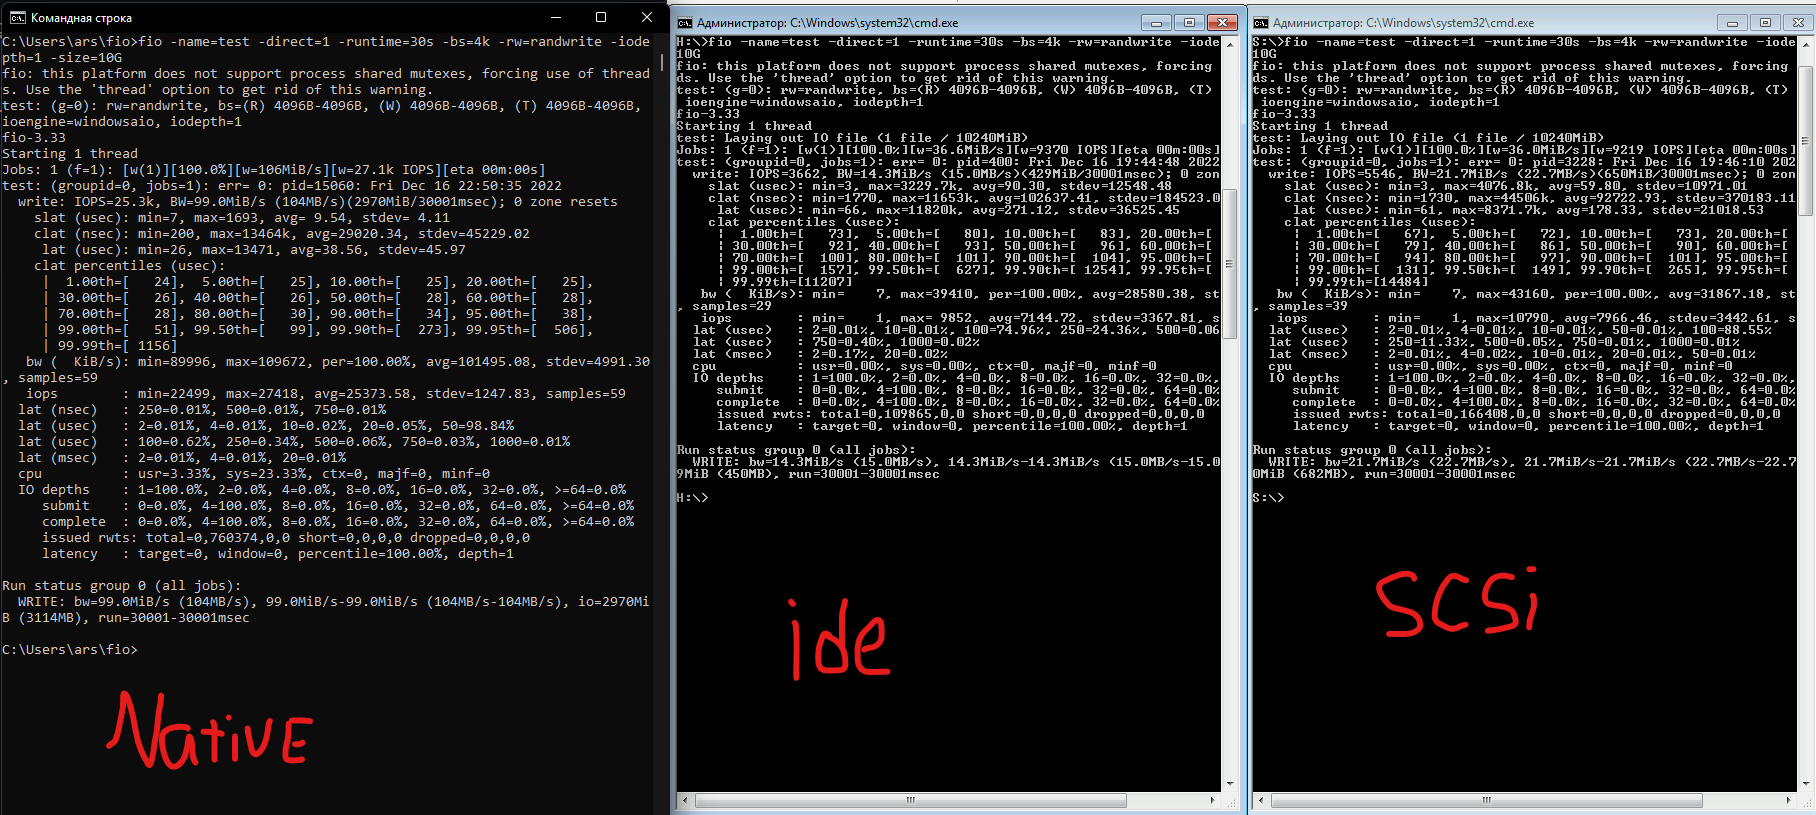 fio-win11-hyperv1-ssd-native-ide-scsi-iodepth1.png